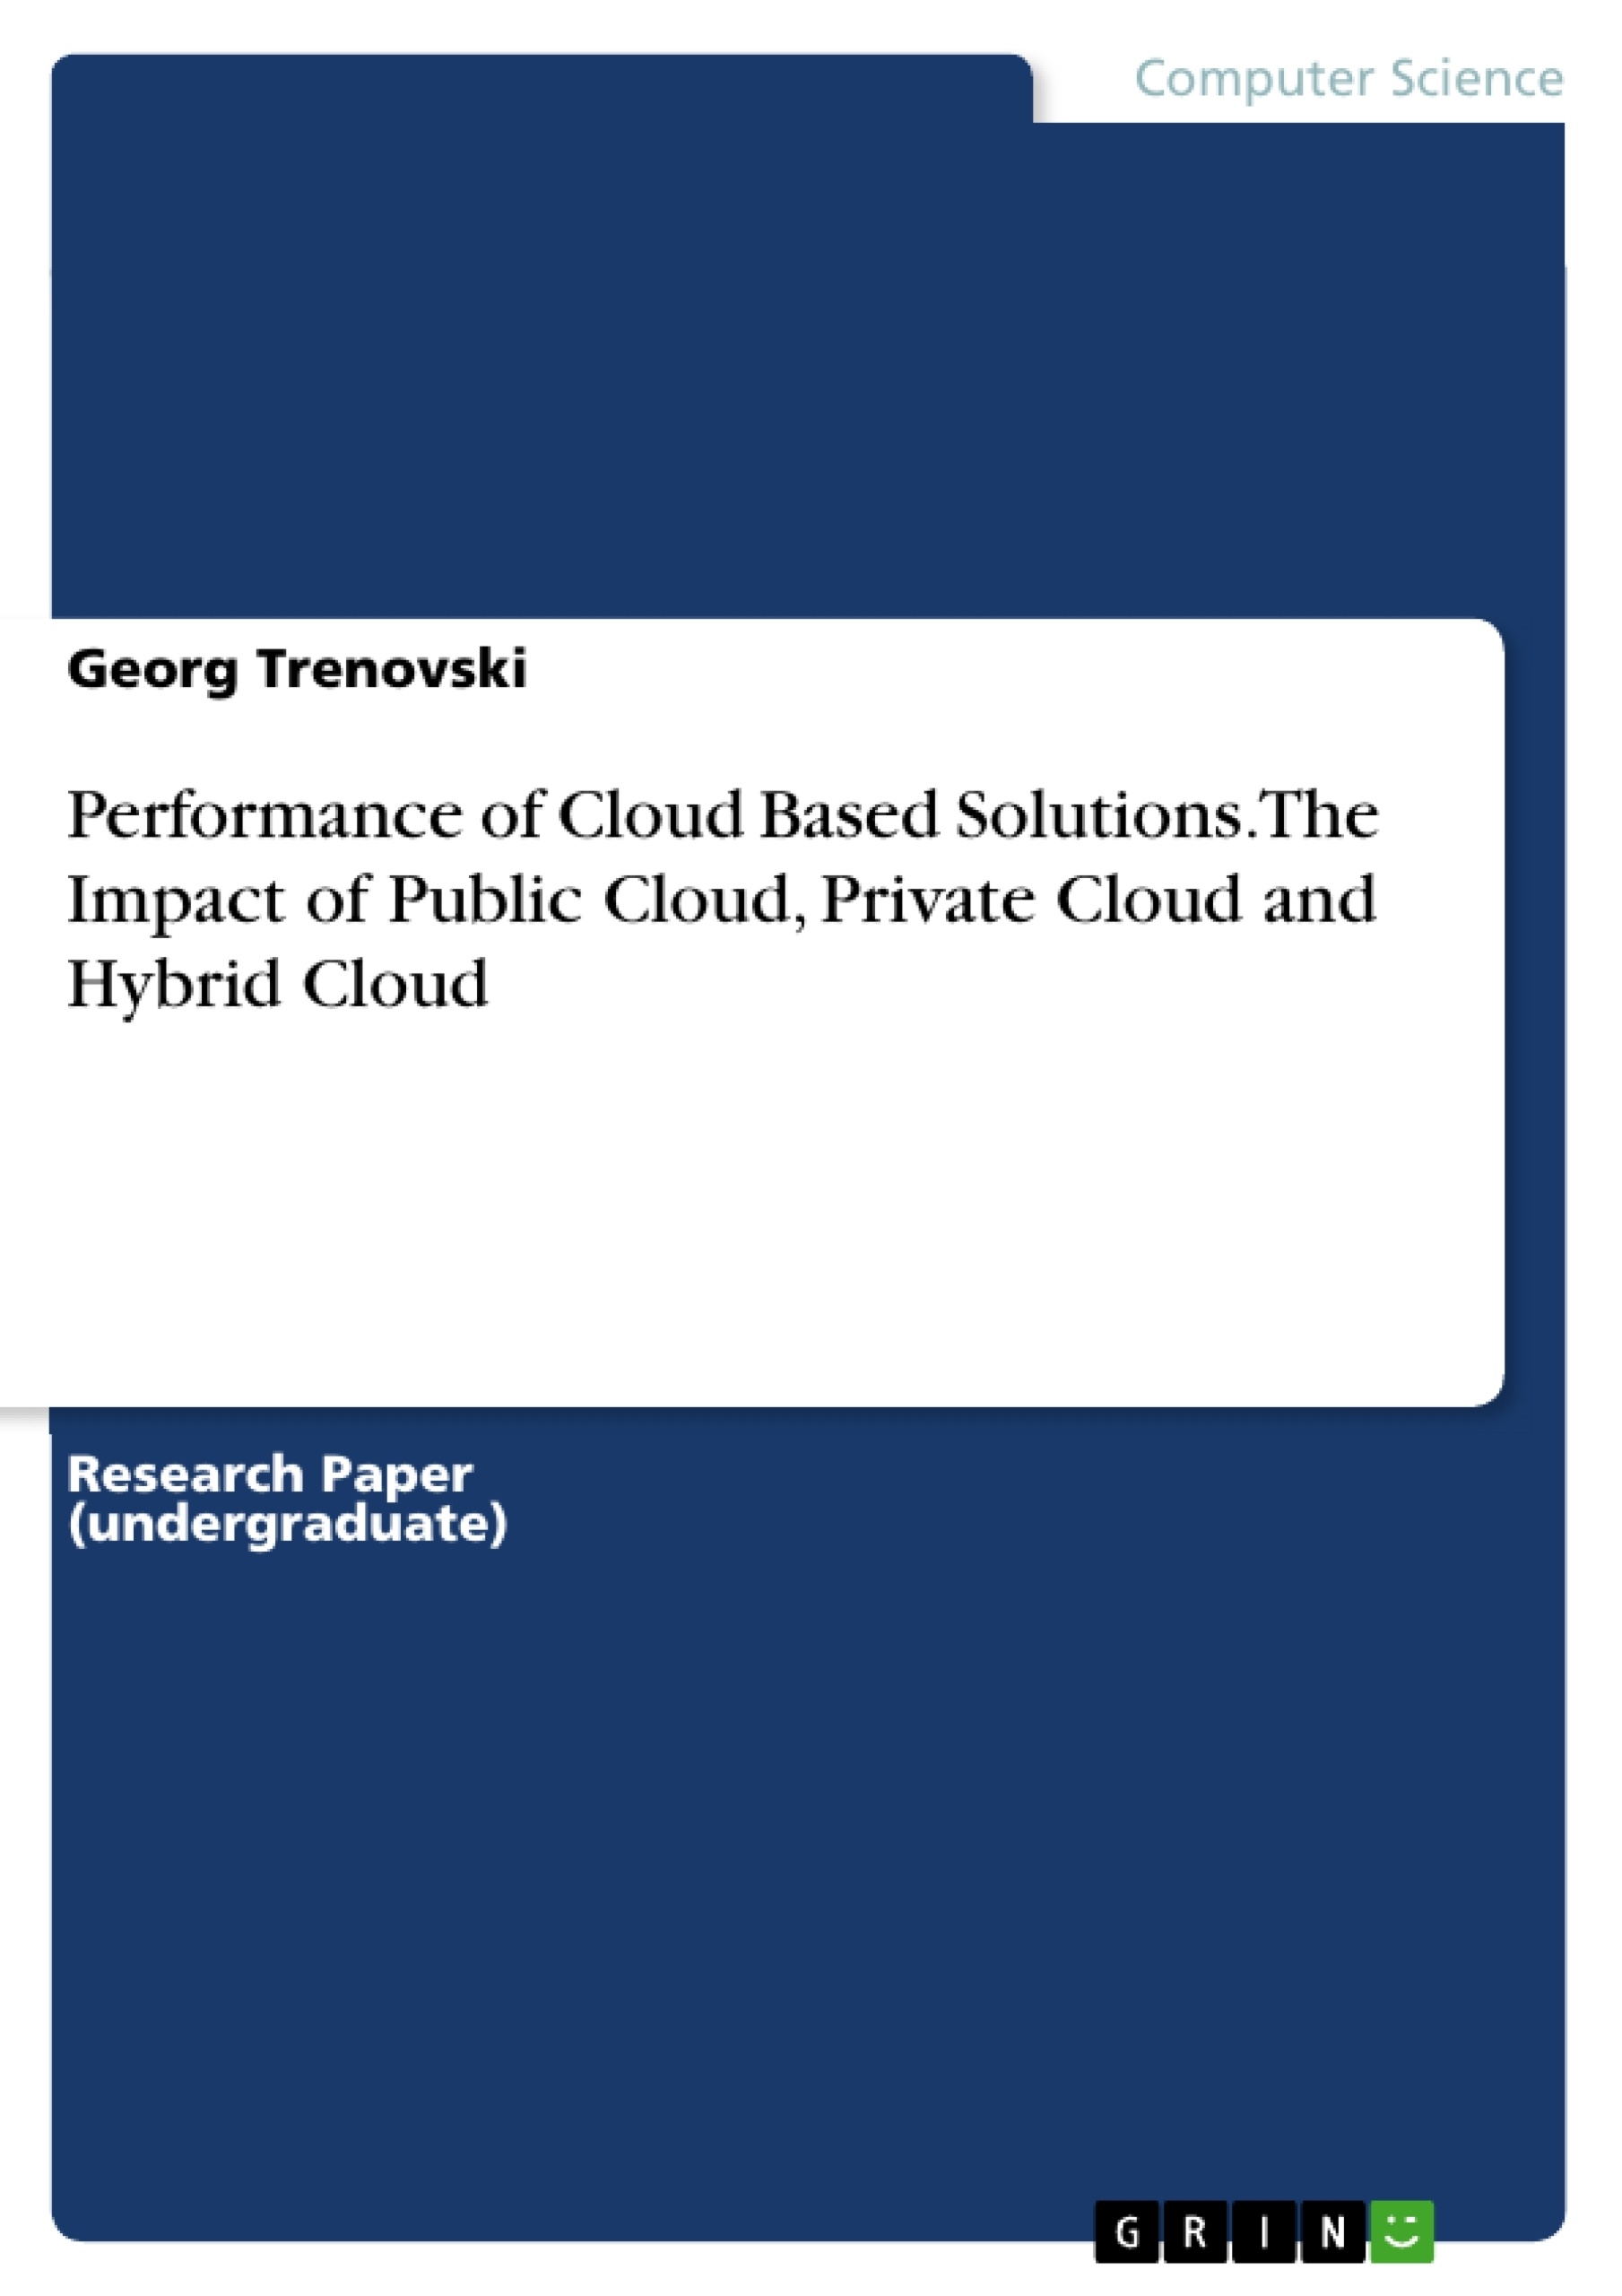 Título: Performance of Cloud Based Solutions. The Impact of  Public Cloud, Private Cloud and Hybrid Cloud